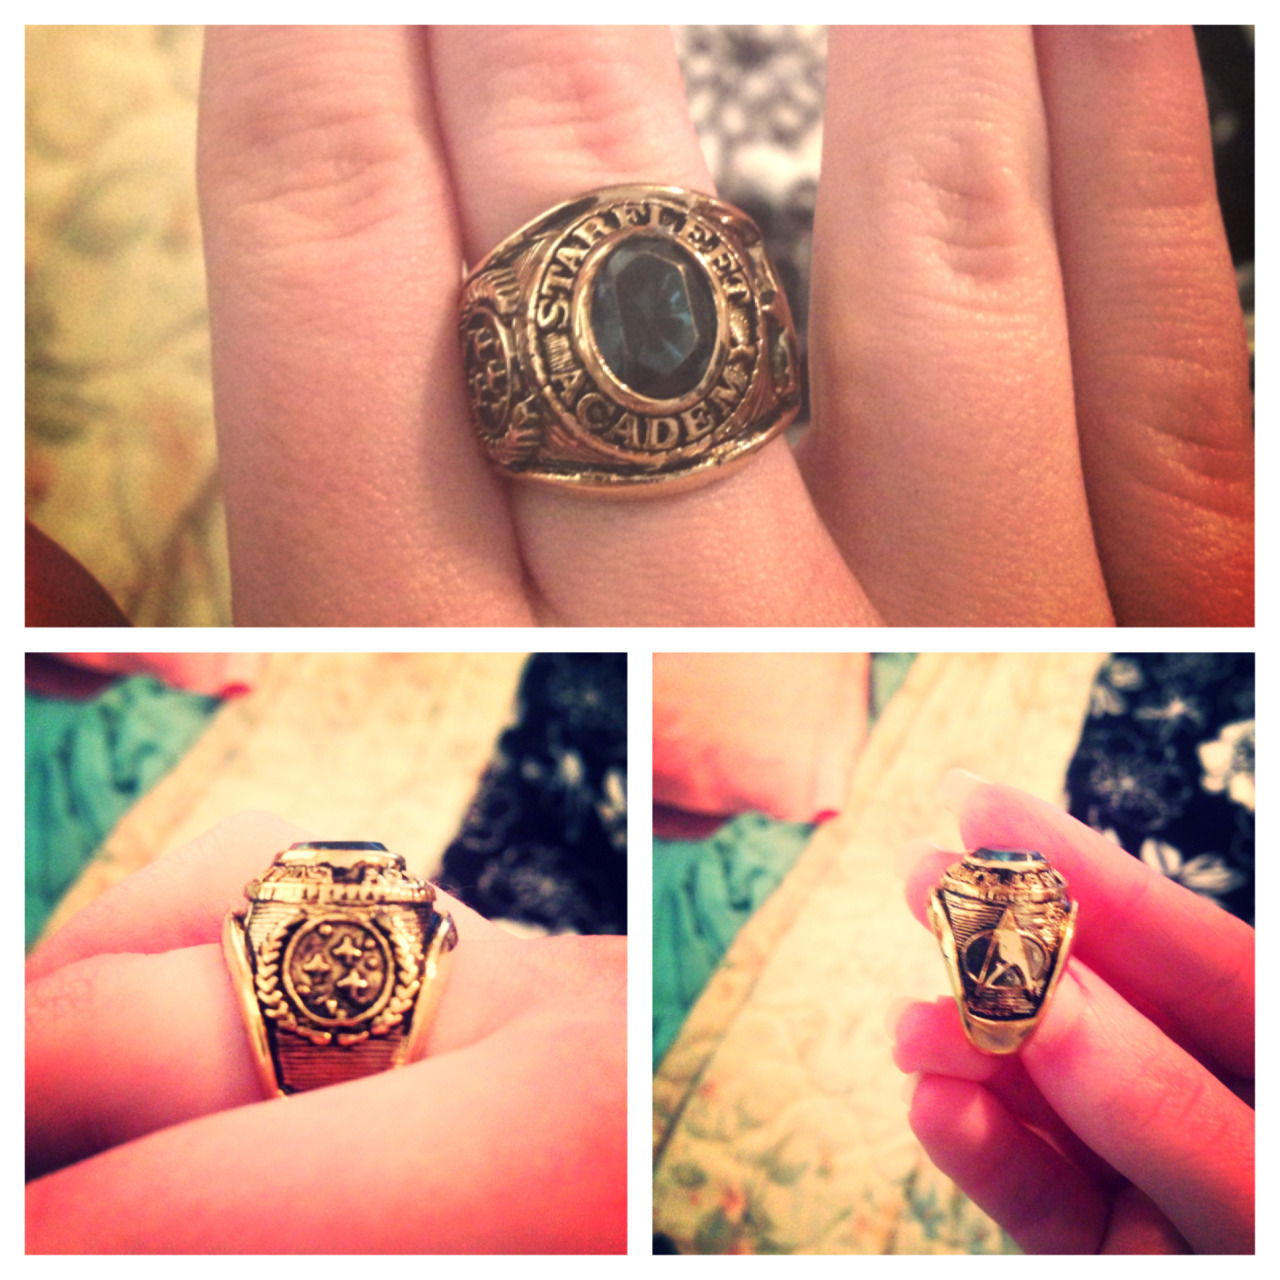 I thought I would post my Starfleet Academy ring for all my Trekkie followers!